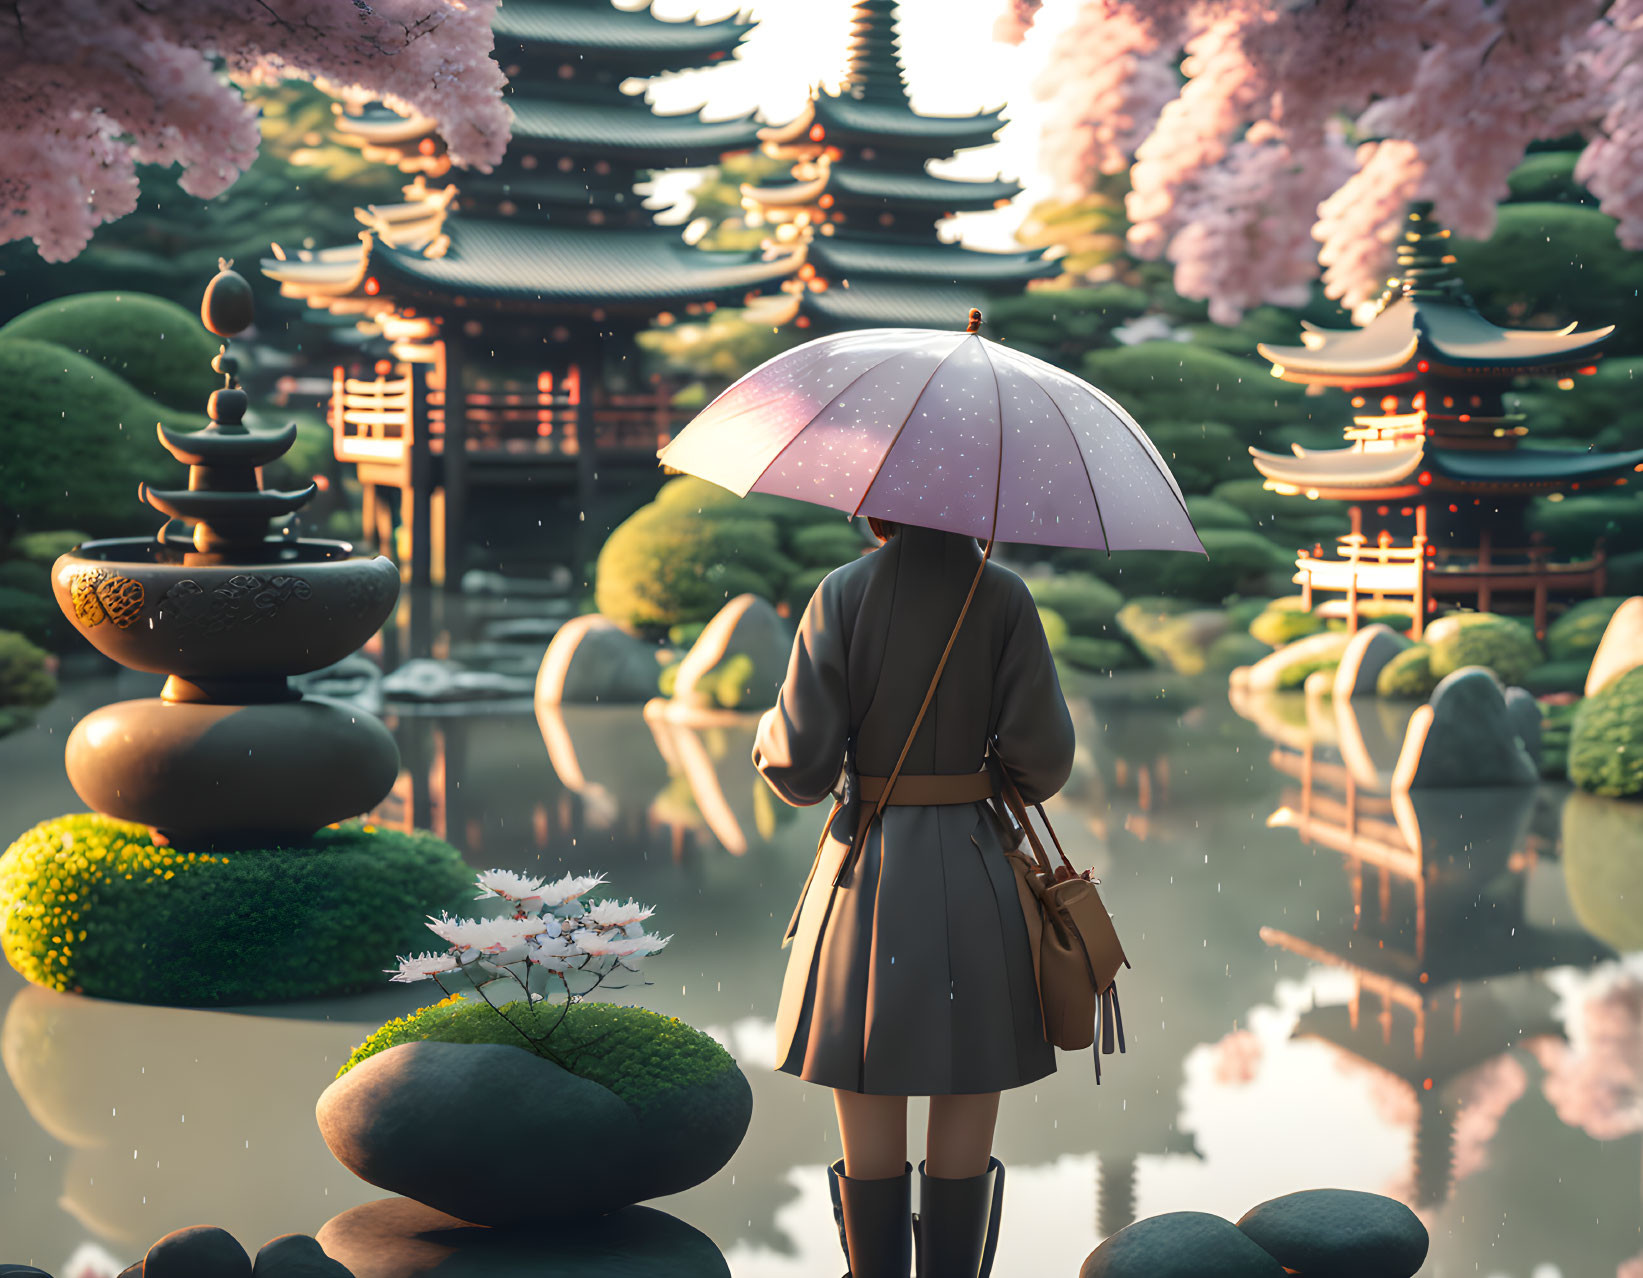 Serene Japanese garden with pagoda, umbrella, and cherry blossoms